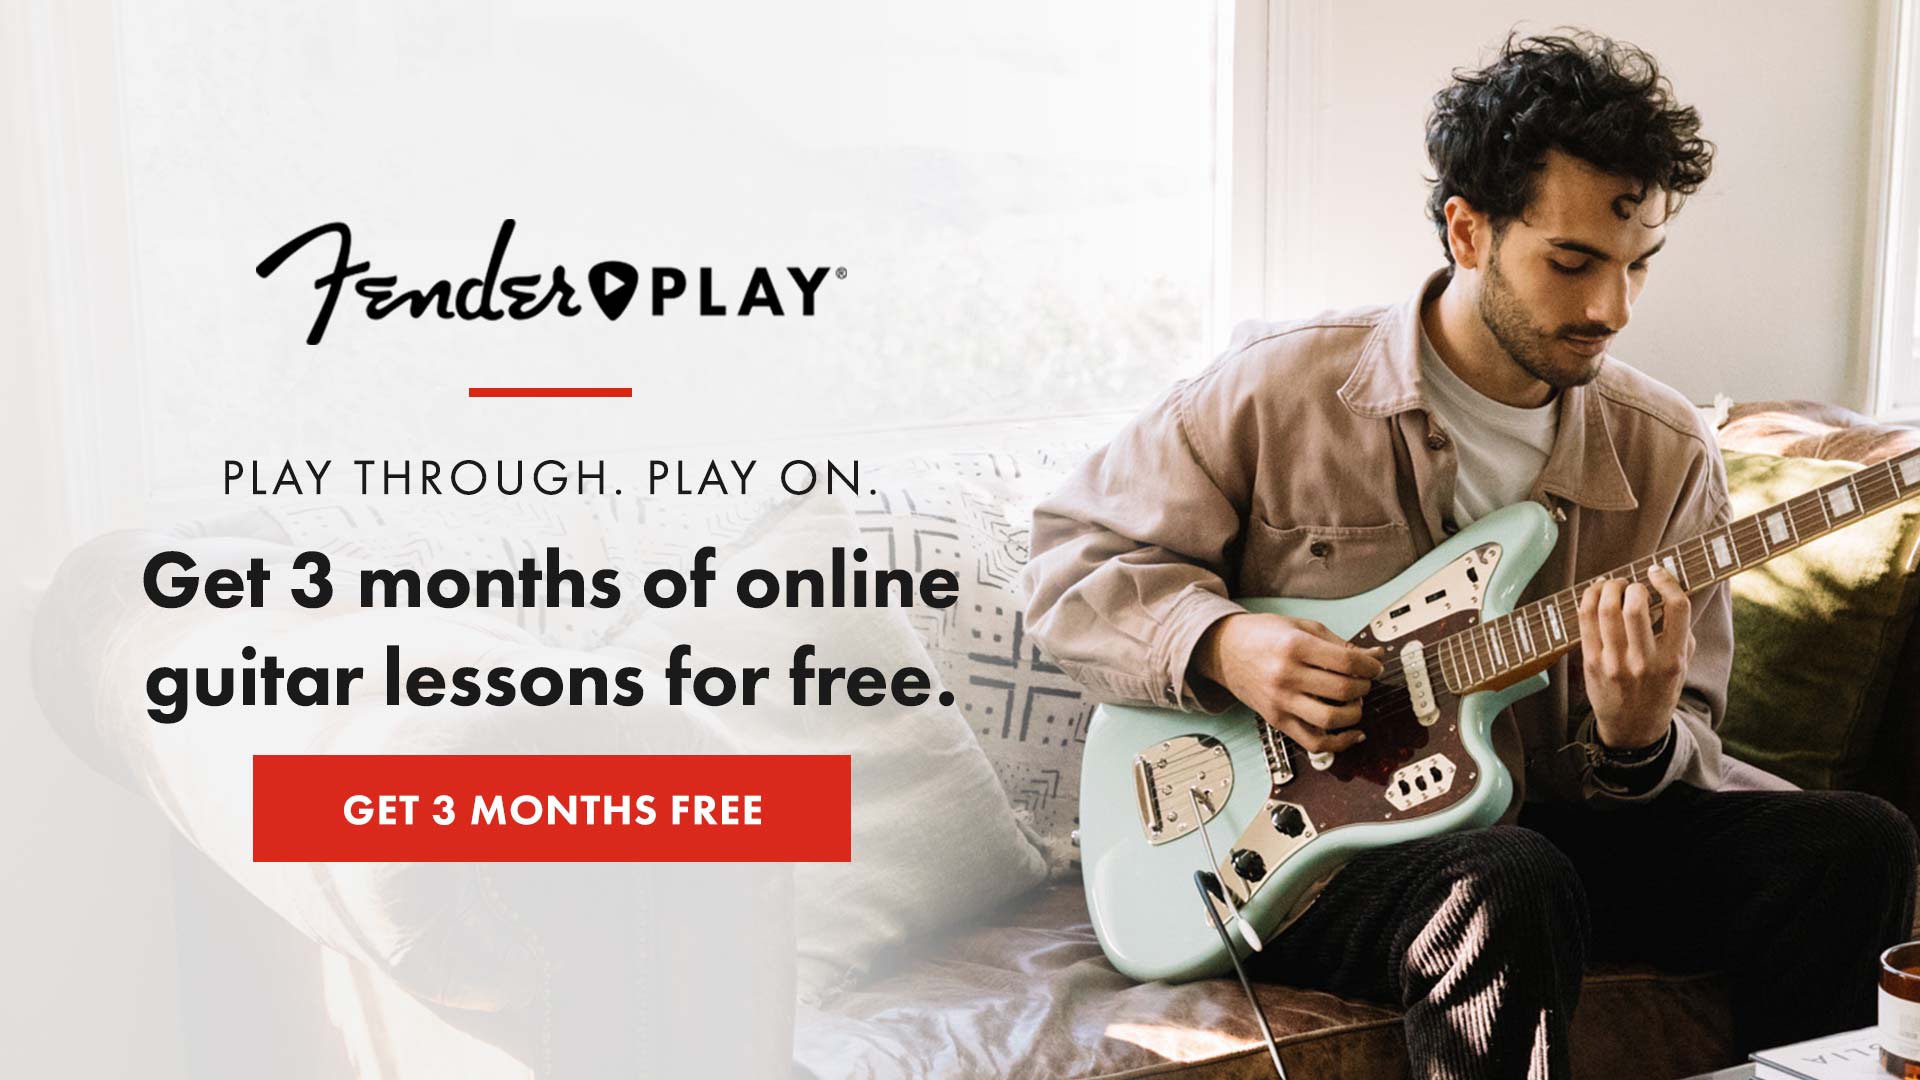 Fender Offers 3 Months of Guitar Lessons Free on Fender Play App!